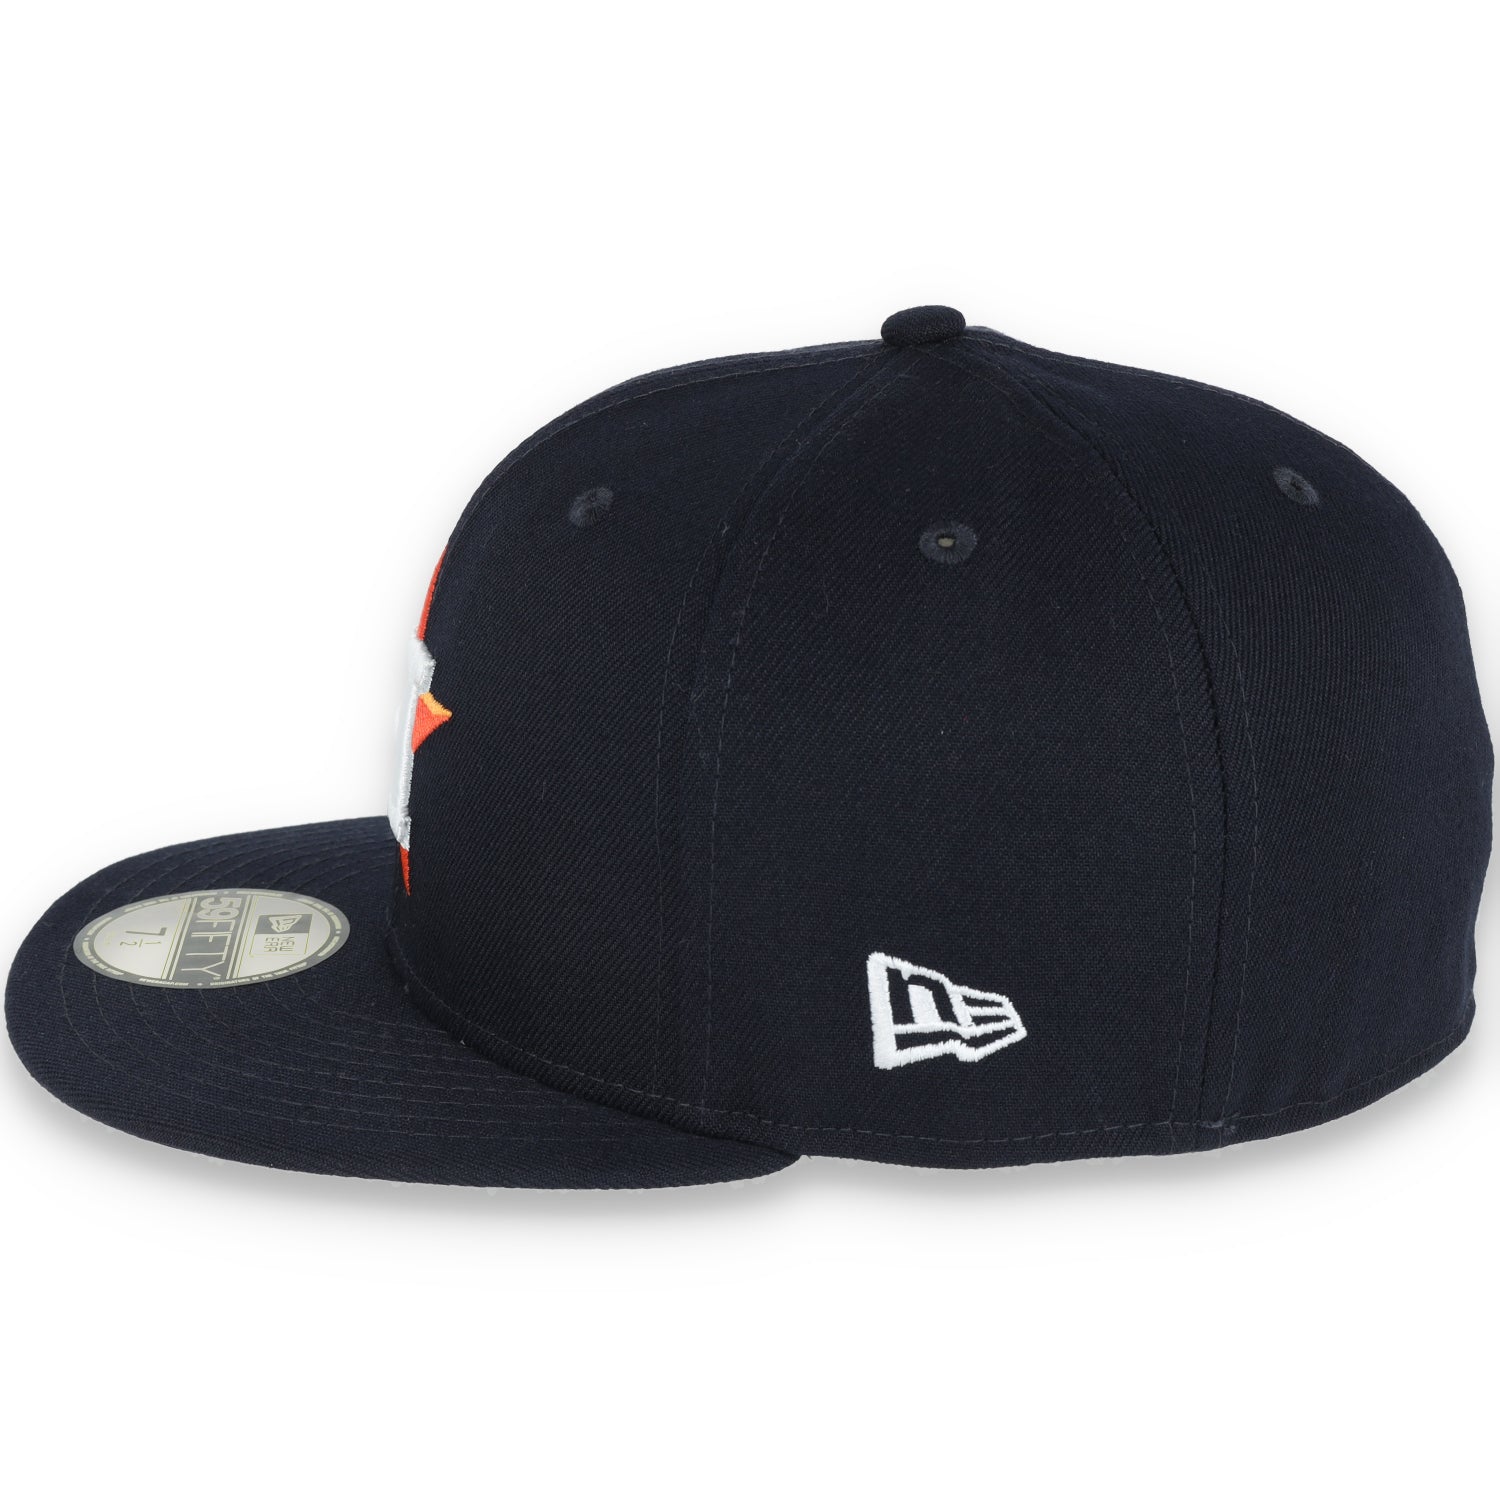 NEW ERA HOUSTON ASTROS INAUGURAL SEASON PATCH 59FIFTY FITTED HAT